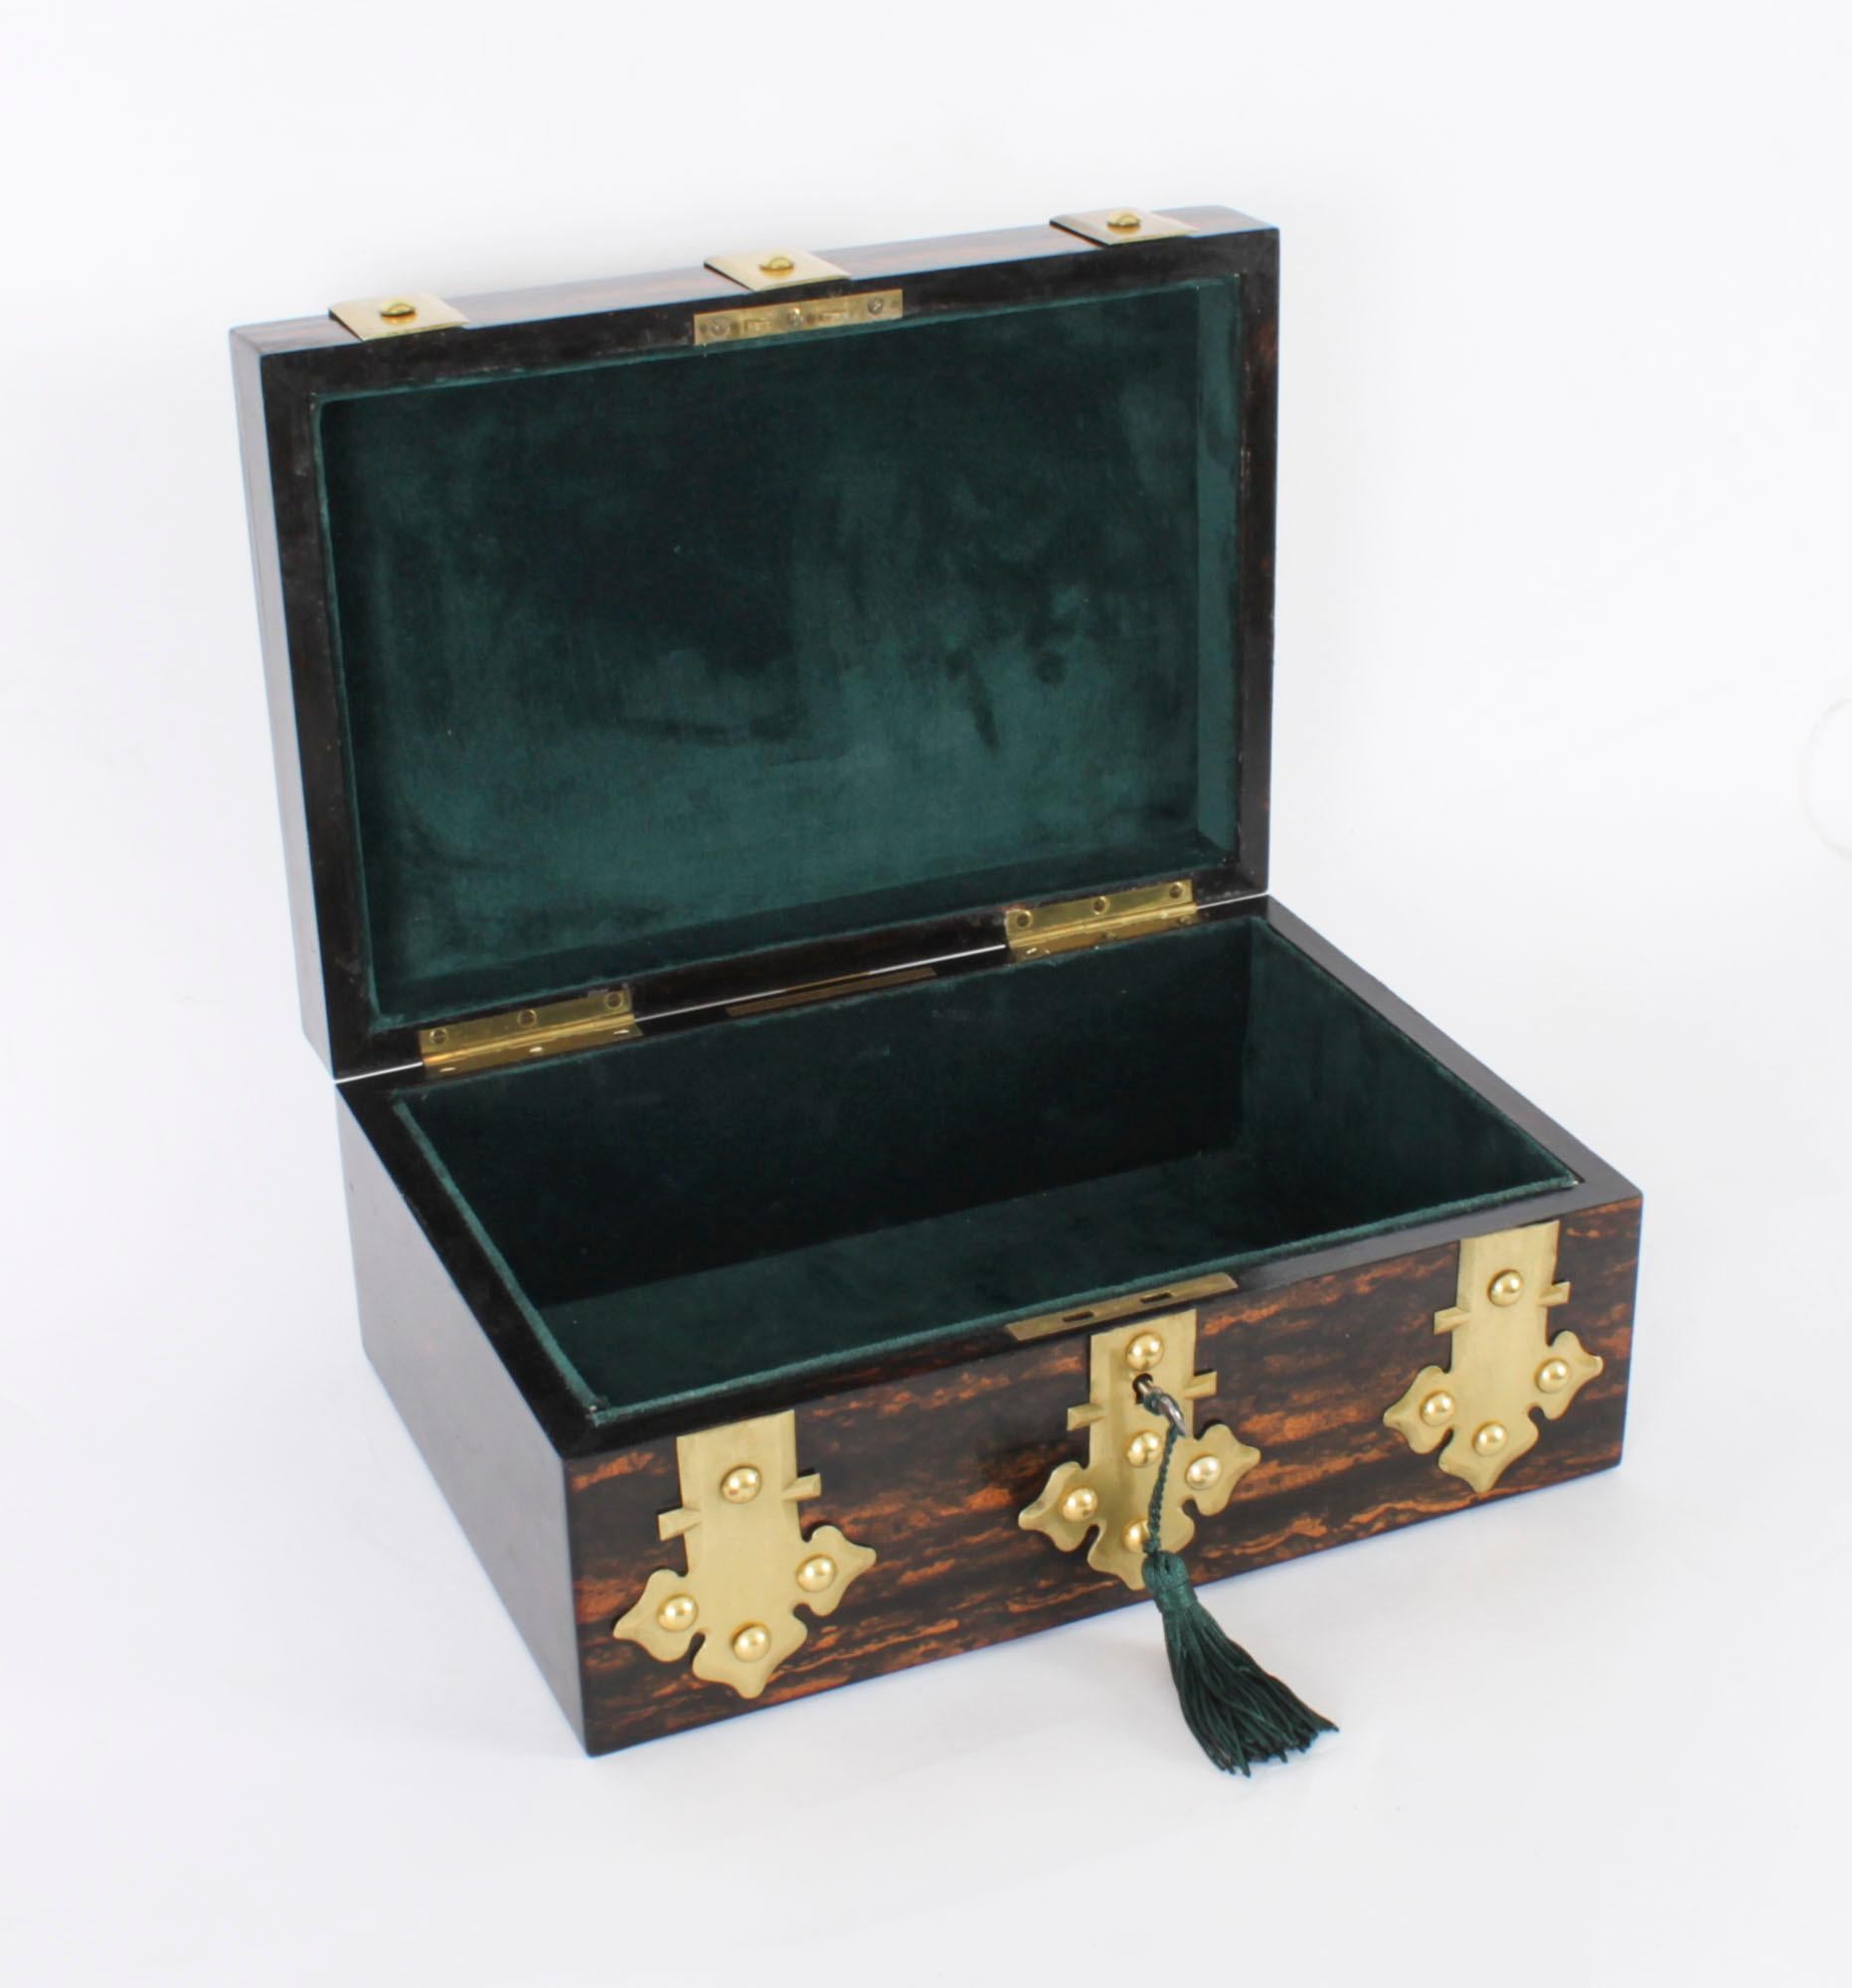 This is a magnificent antique brass bound coromandel Victorian Gothic Revival casket by Parkins and Gotto, 24 & 25 Oxford Street, London,  circa 1860 in date.

The rectangular box features studded brass bands terminating in fleur de lys appliqués,